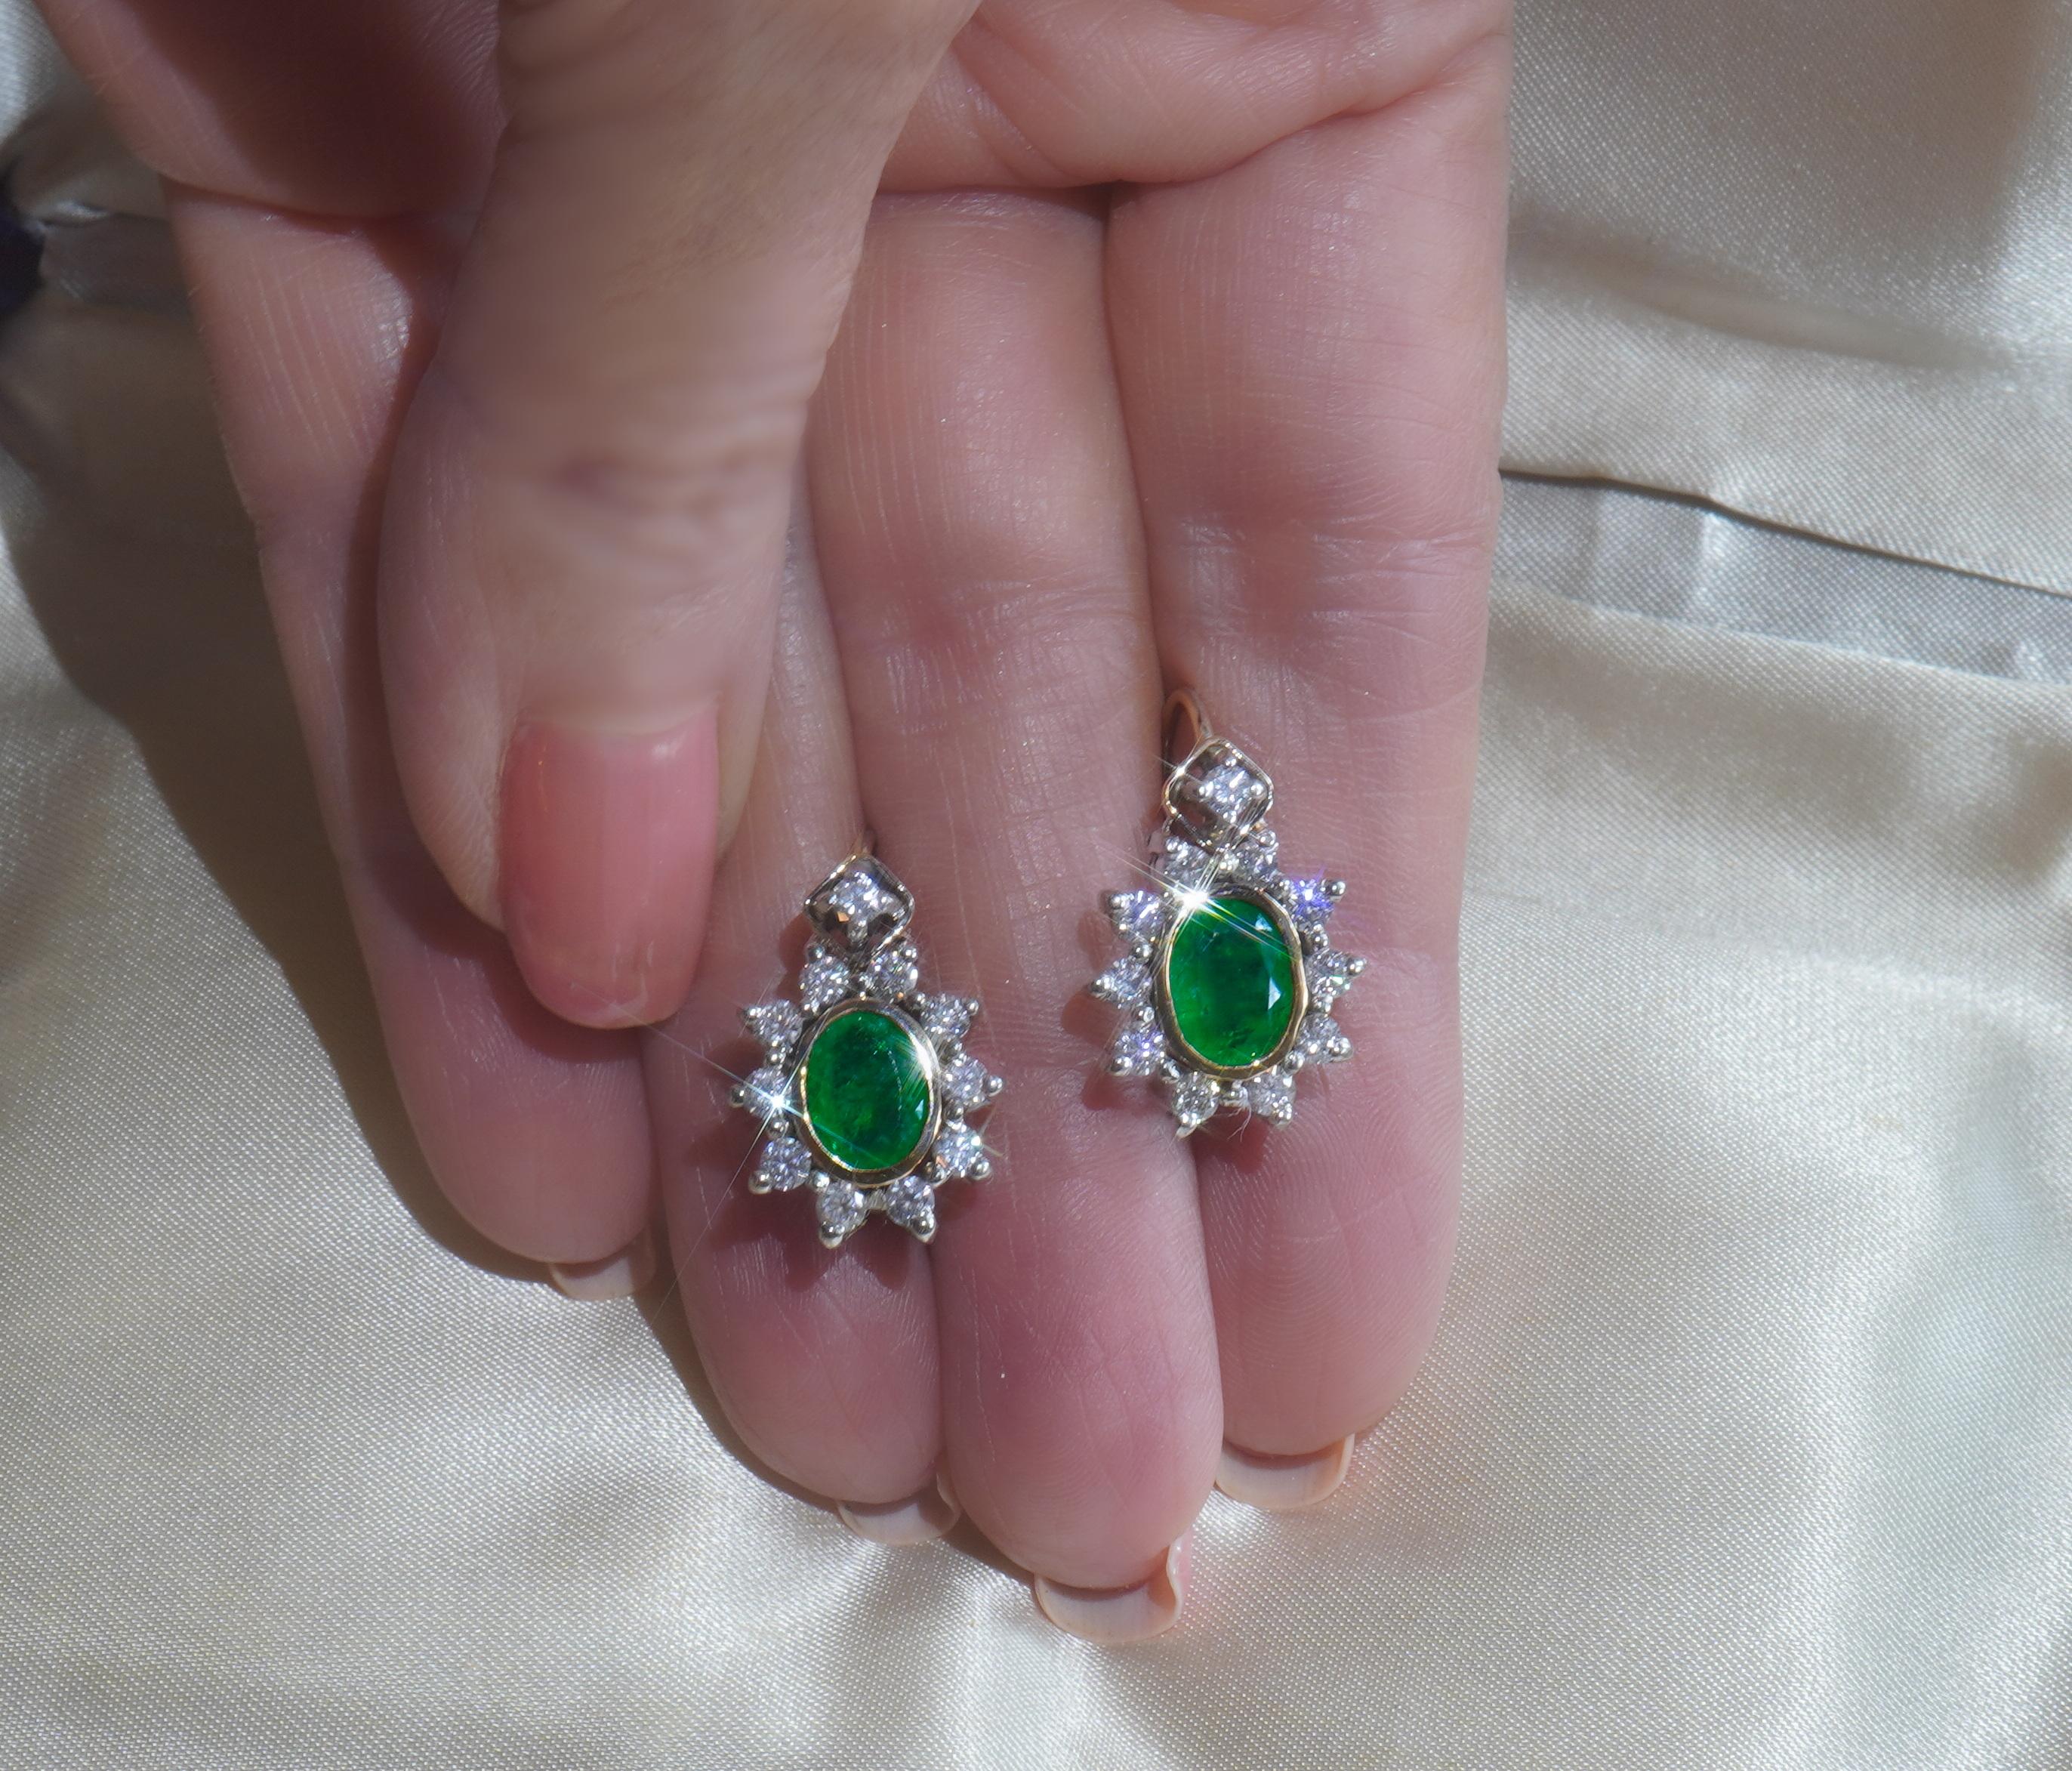 Old South Jewels proudly presents...LUXURY.  VINTAGE GIA CERTIFIED 5.04 CARAT COLUMBIAN EMERALDS & DIAMOND VINTAGE EARRINGS & BOX!  BRILLIANT GREEN TRANSPARENT 3.72 CARATS COLUMBIAN EMERALDS ARE CROWNED WITH 1.32 CARATS OF SPARKLING DIAMONDS.  FINE